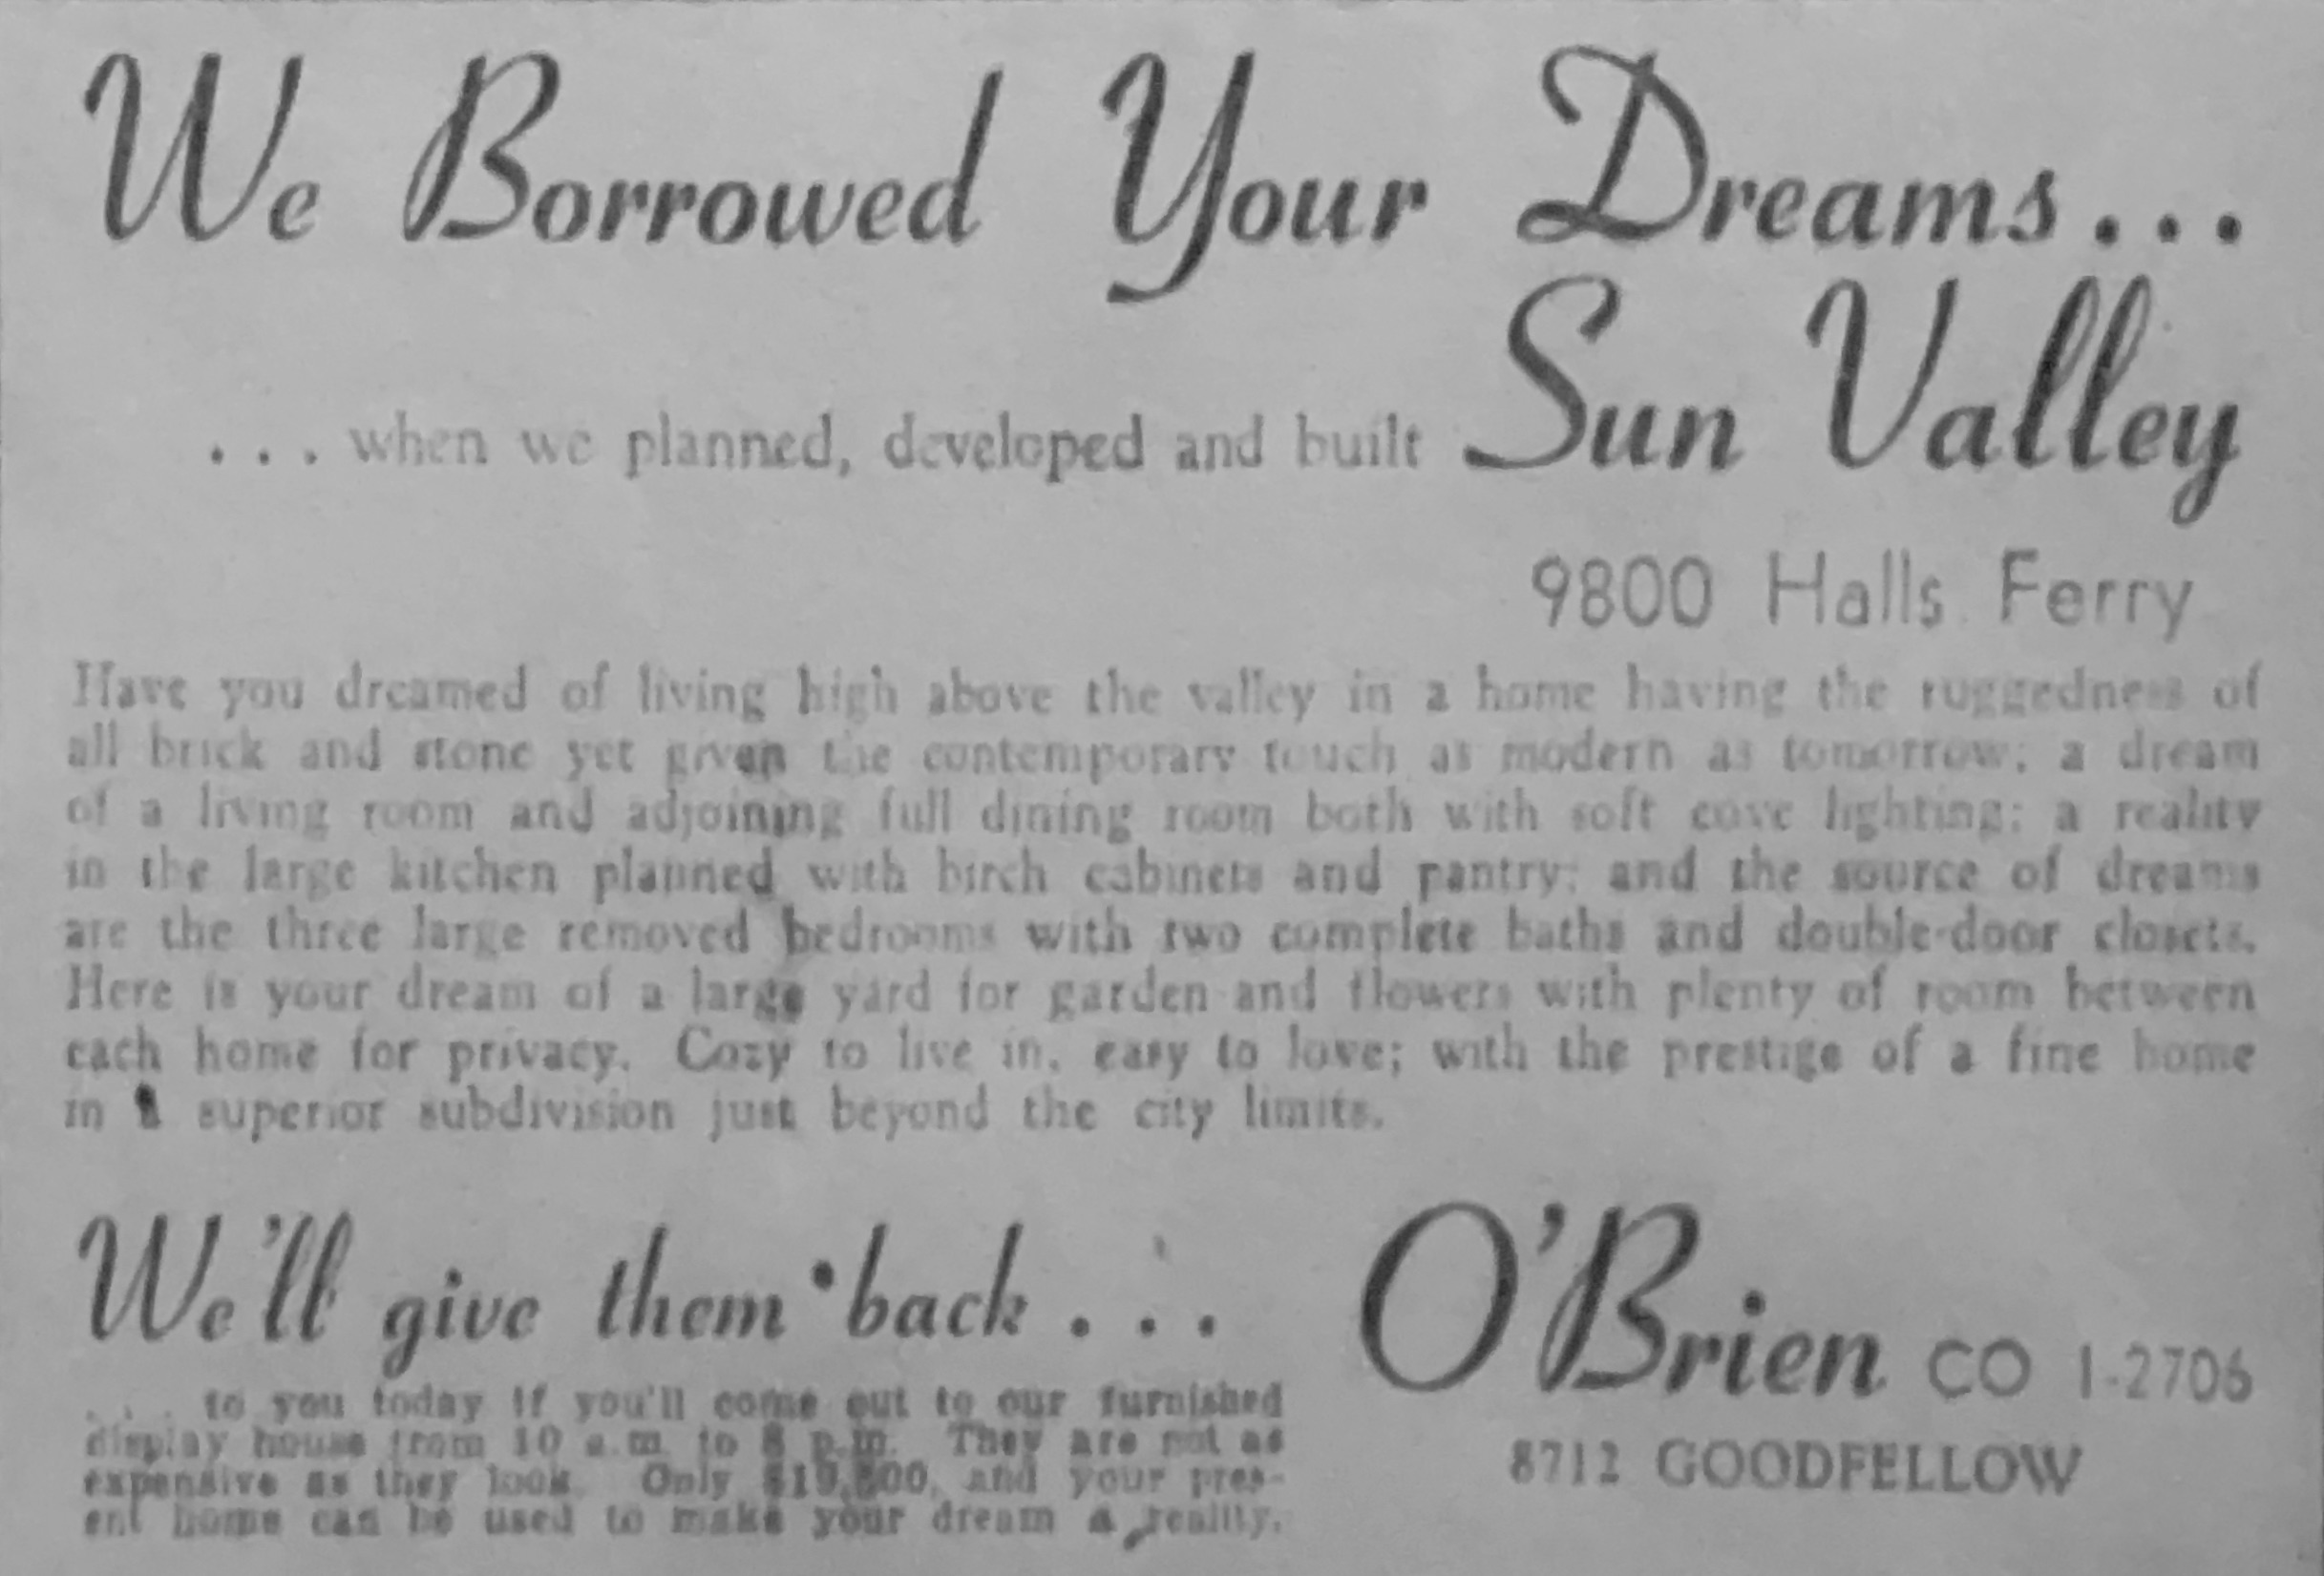 Sun Valley promotional ad. St. Louis-Post Dispatch, May 13, 1956. 